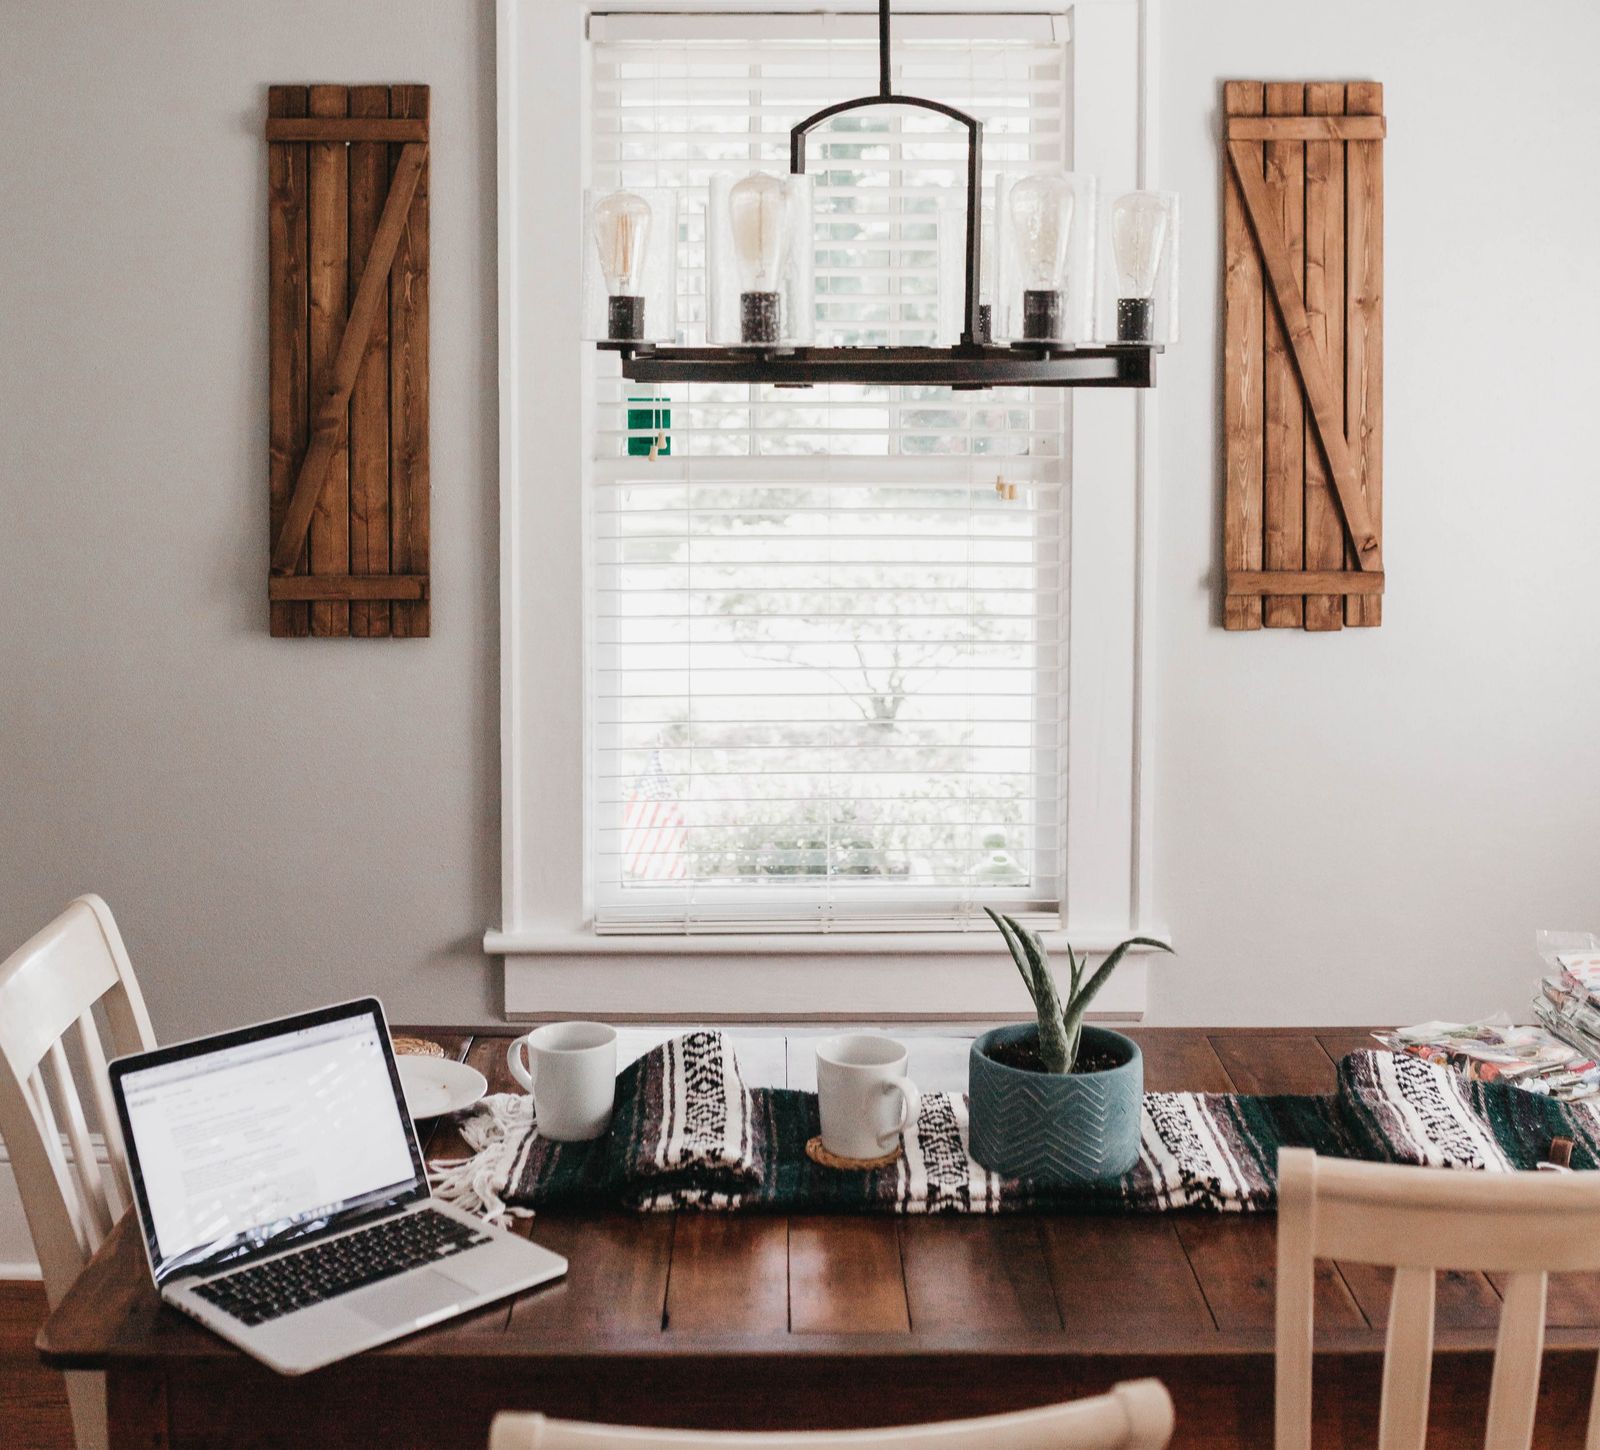 Kitchen Table CEOs blog - What Website Pages Do I need on my Website - Wooden table and laptop open - Camylla Battani via Unsplash